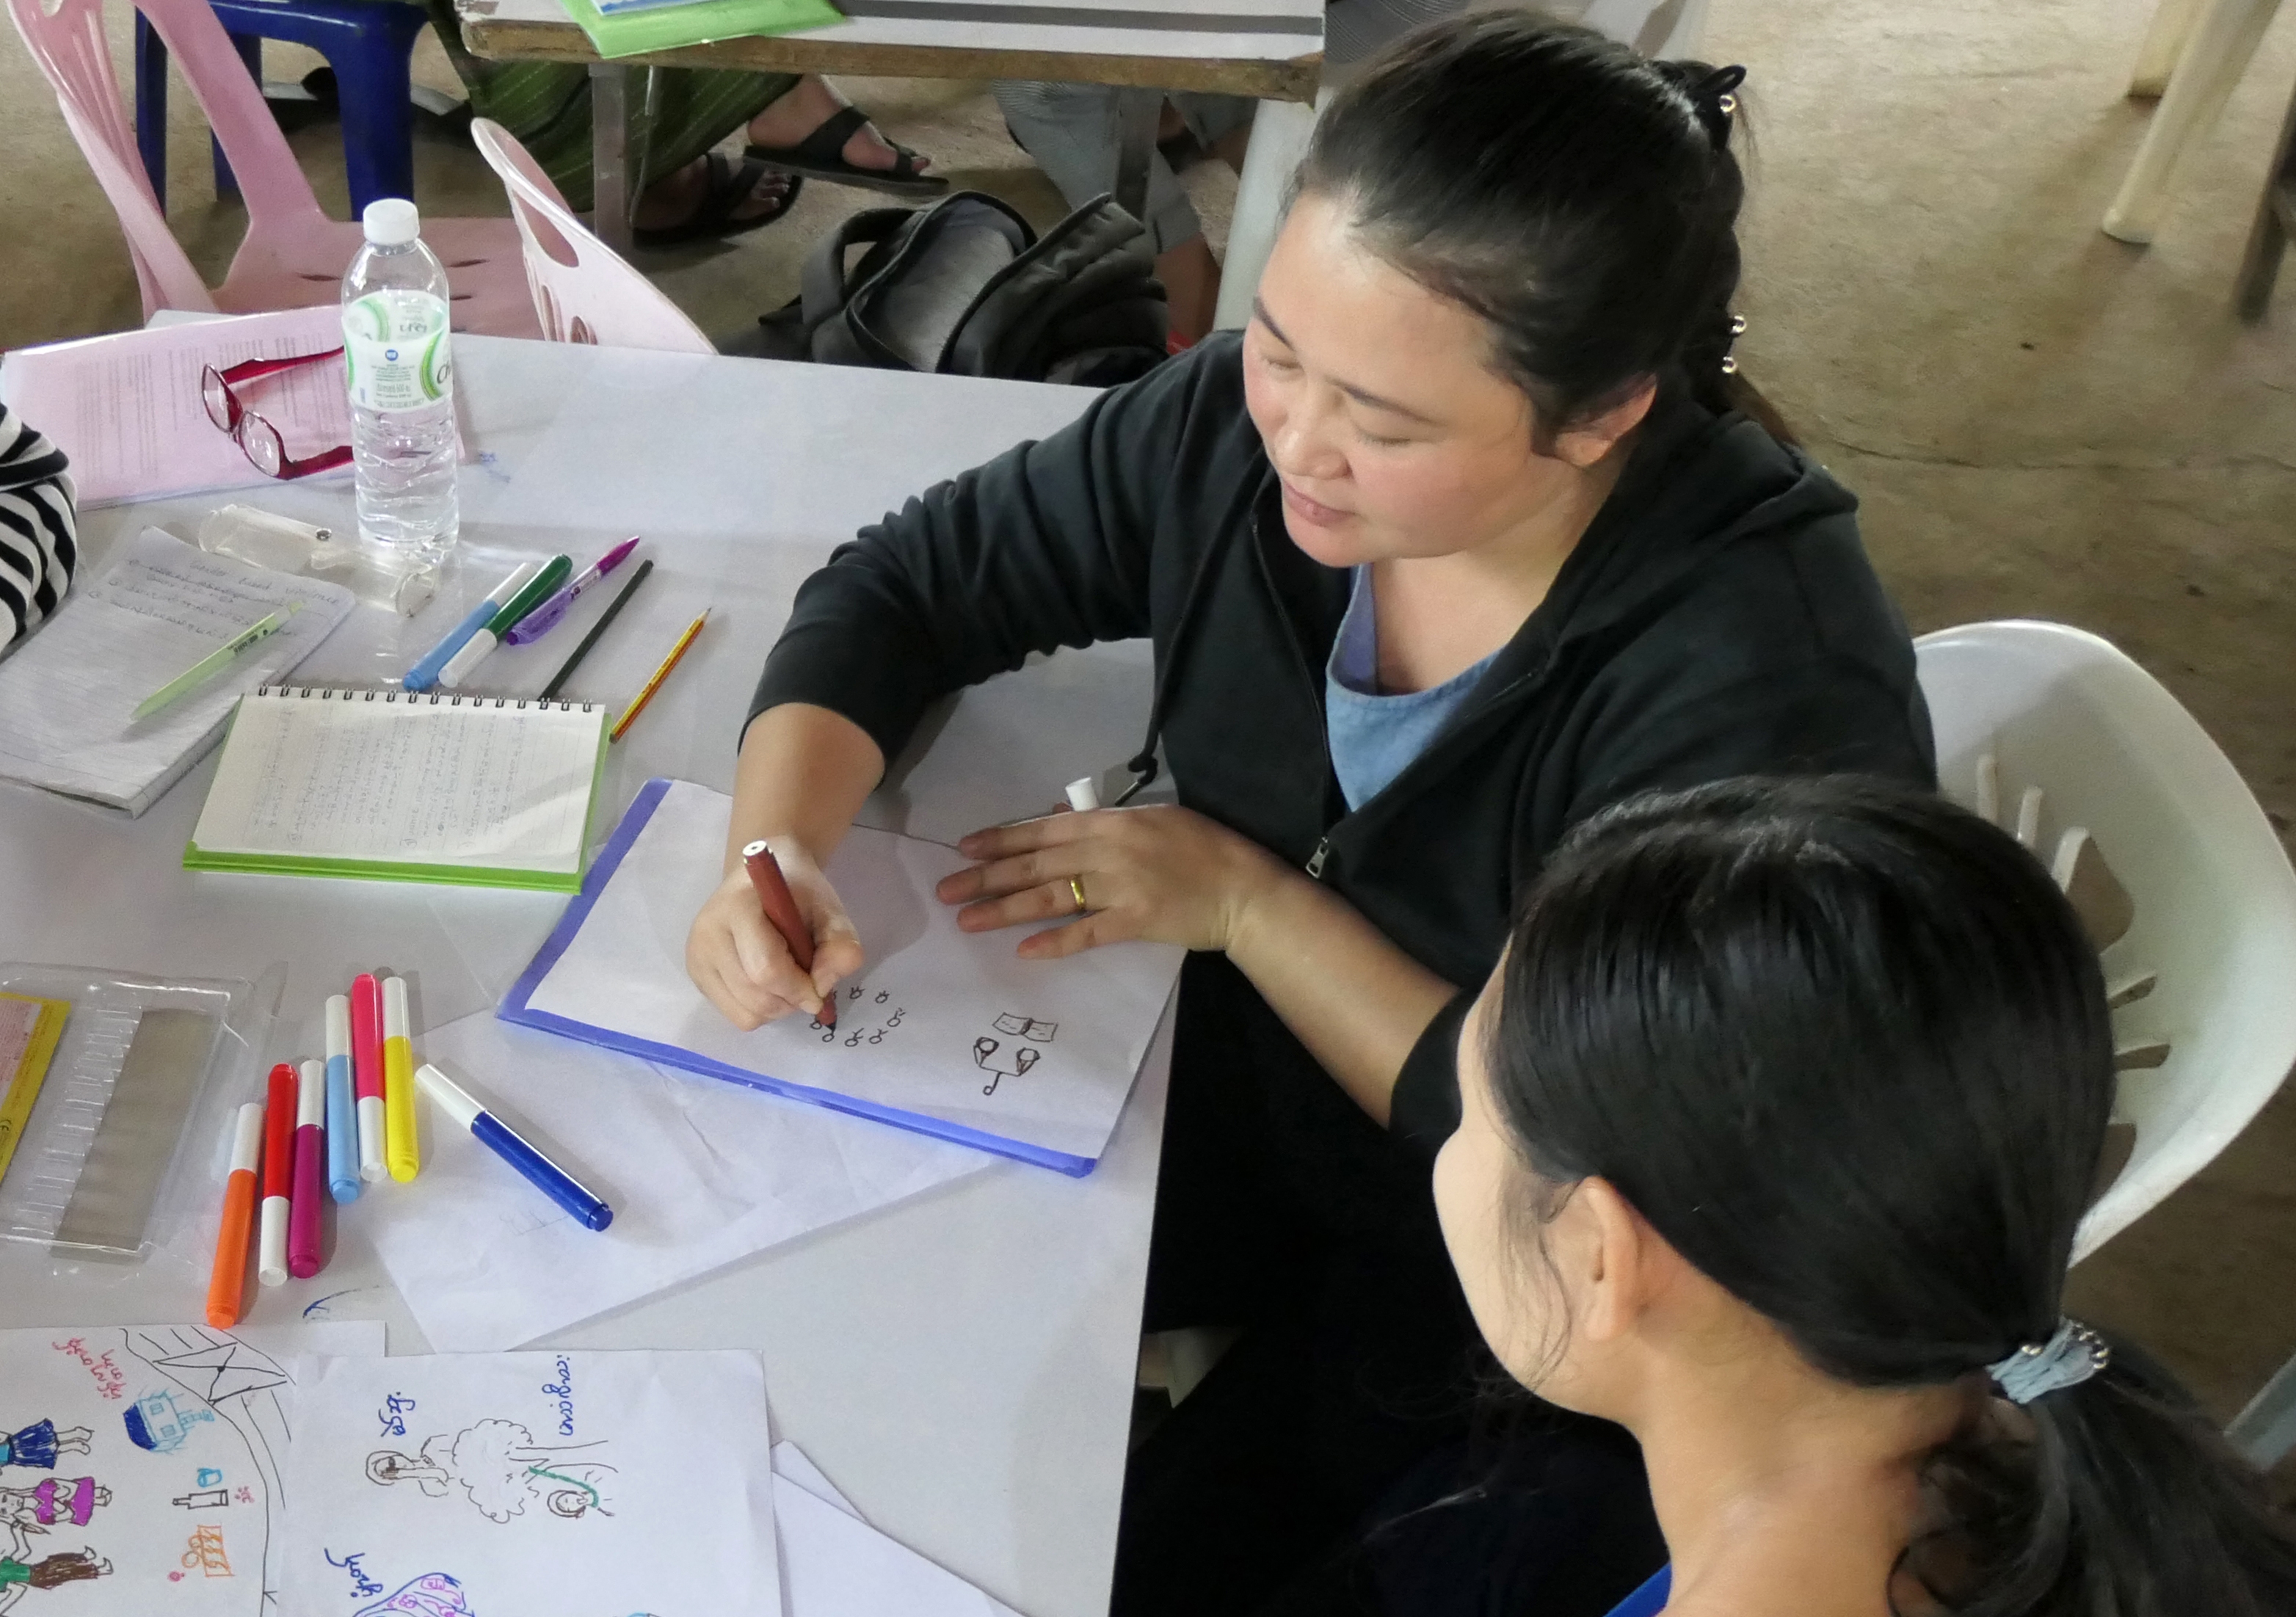 Refugee women in Malaysia drawing storyboards seated at a desk